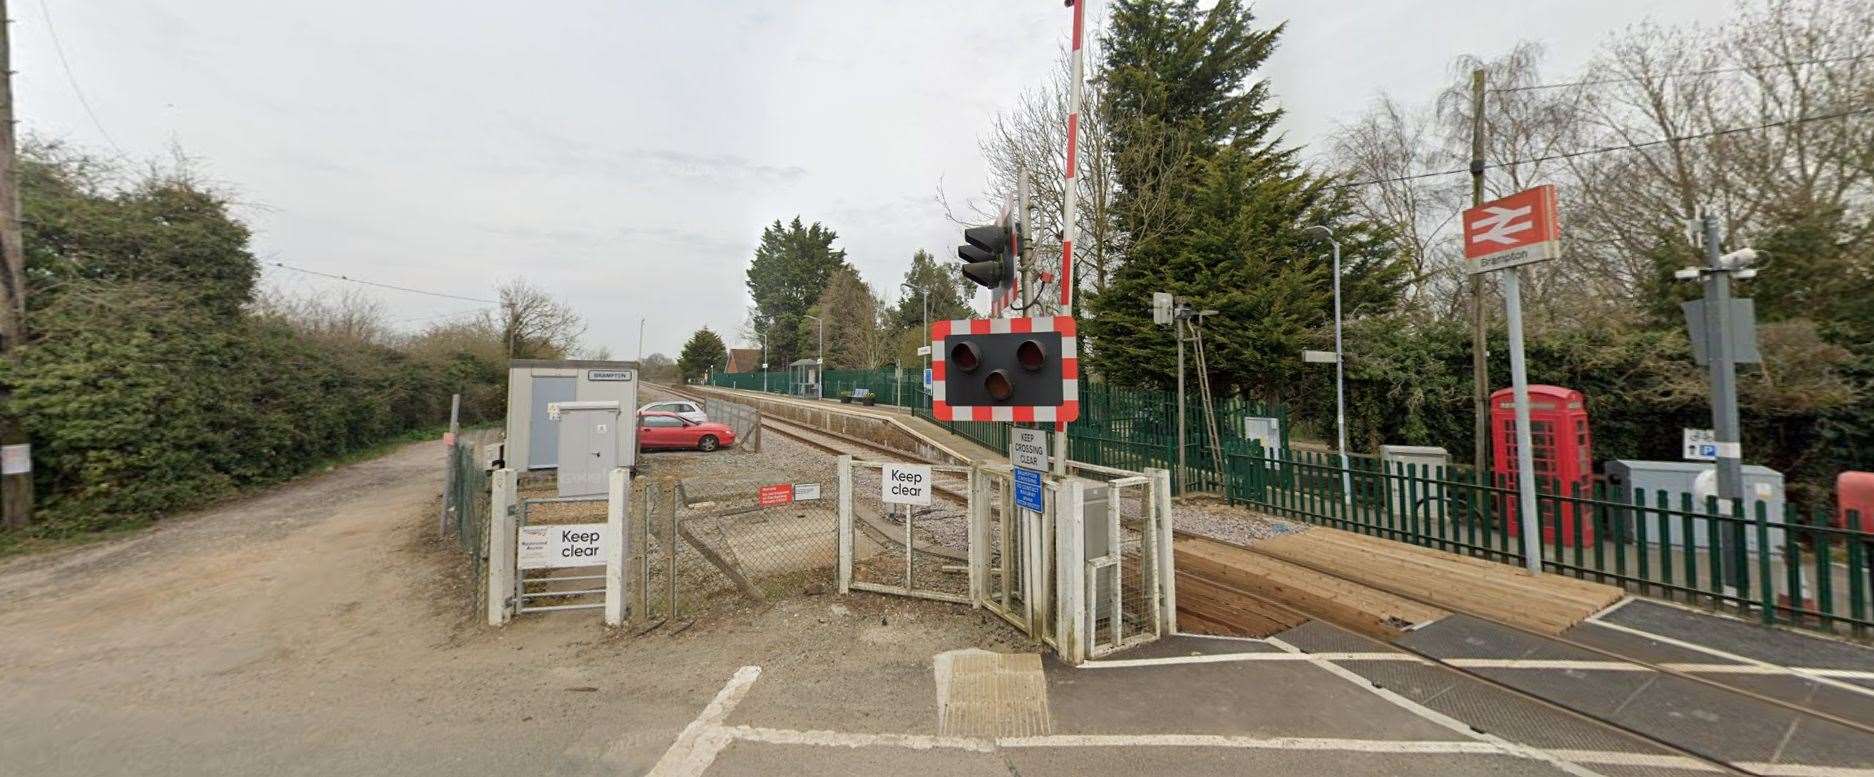 Brampton is the third least used station in Suffolk, with 9,390 entries and exits in the last period. Picture: Google Maps